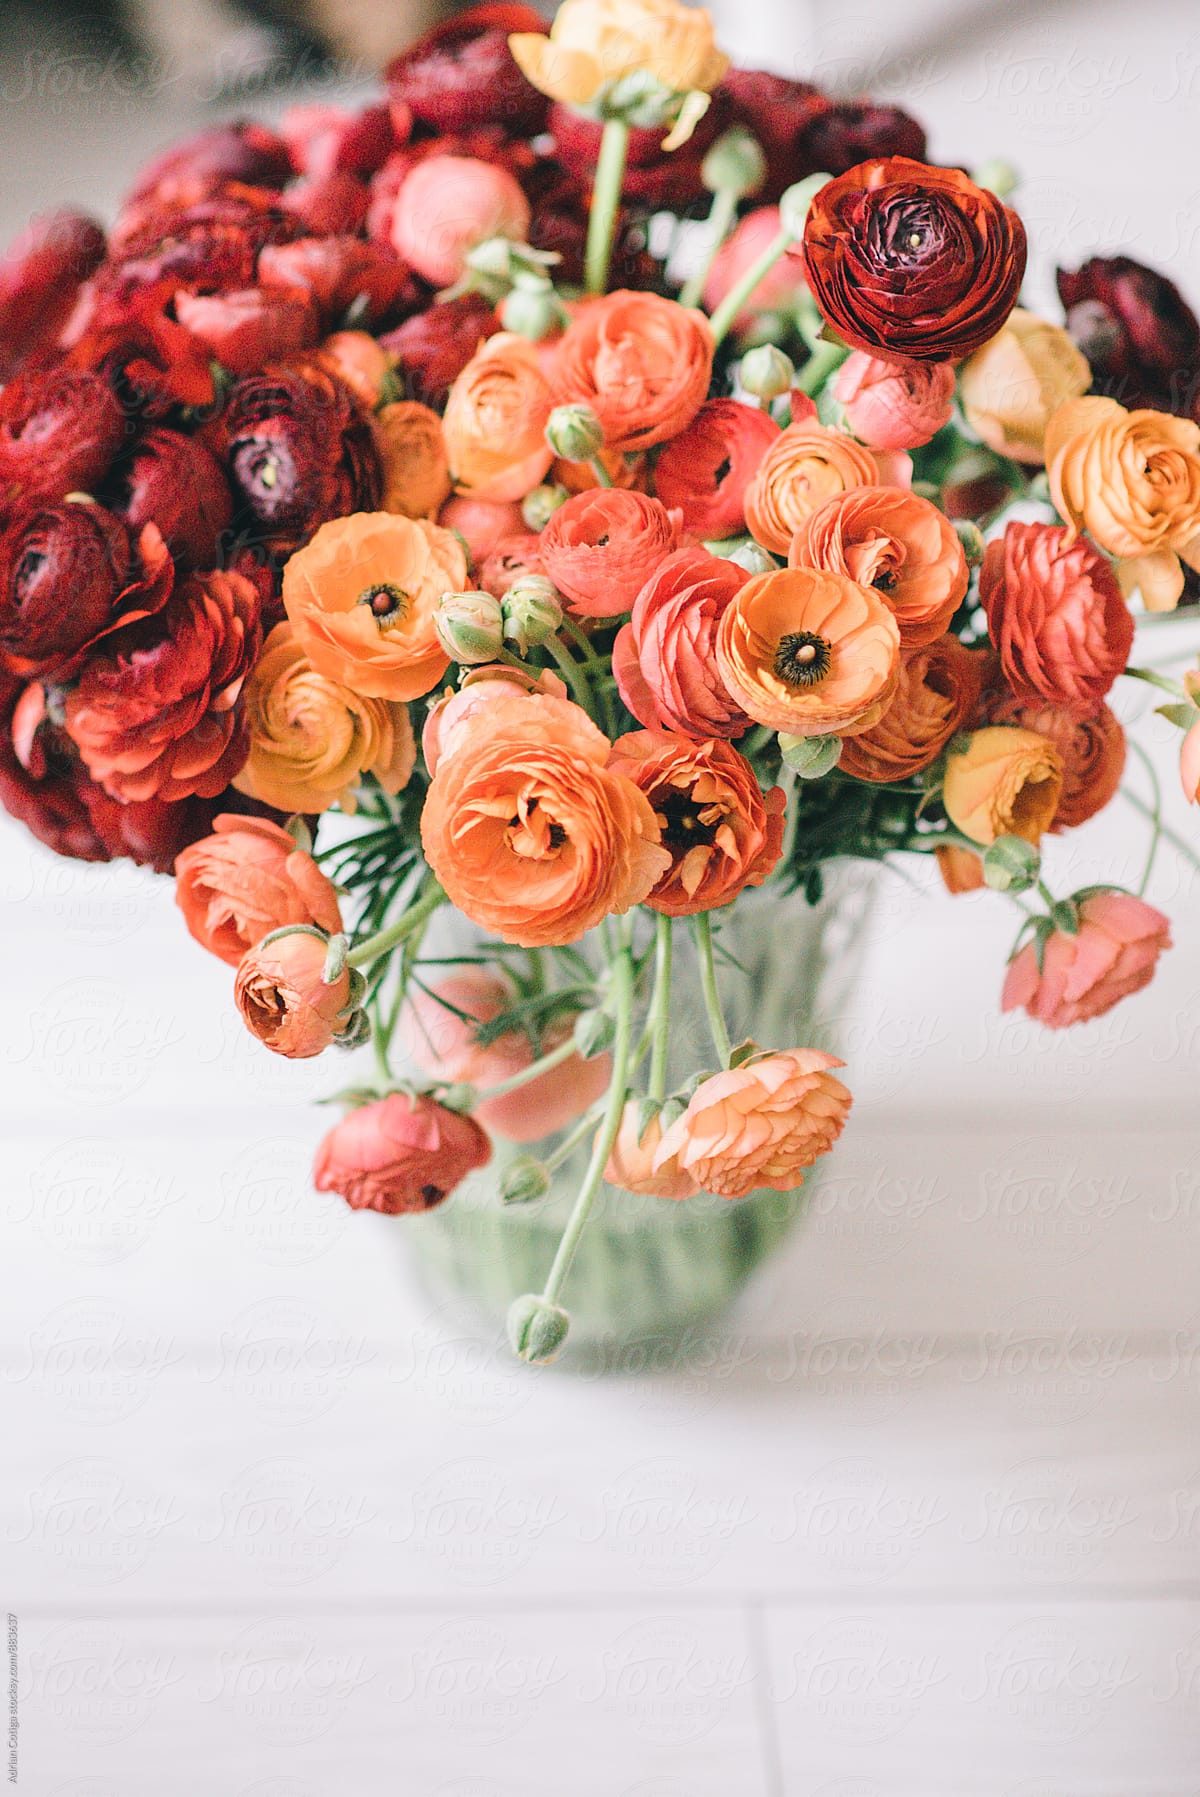 Spring flowers bouquet with orange and red ranunculus